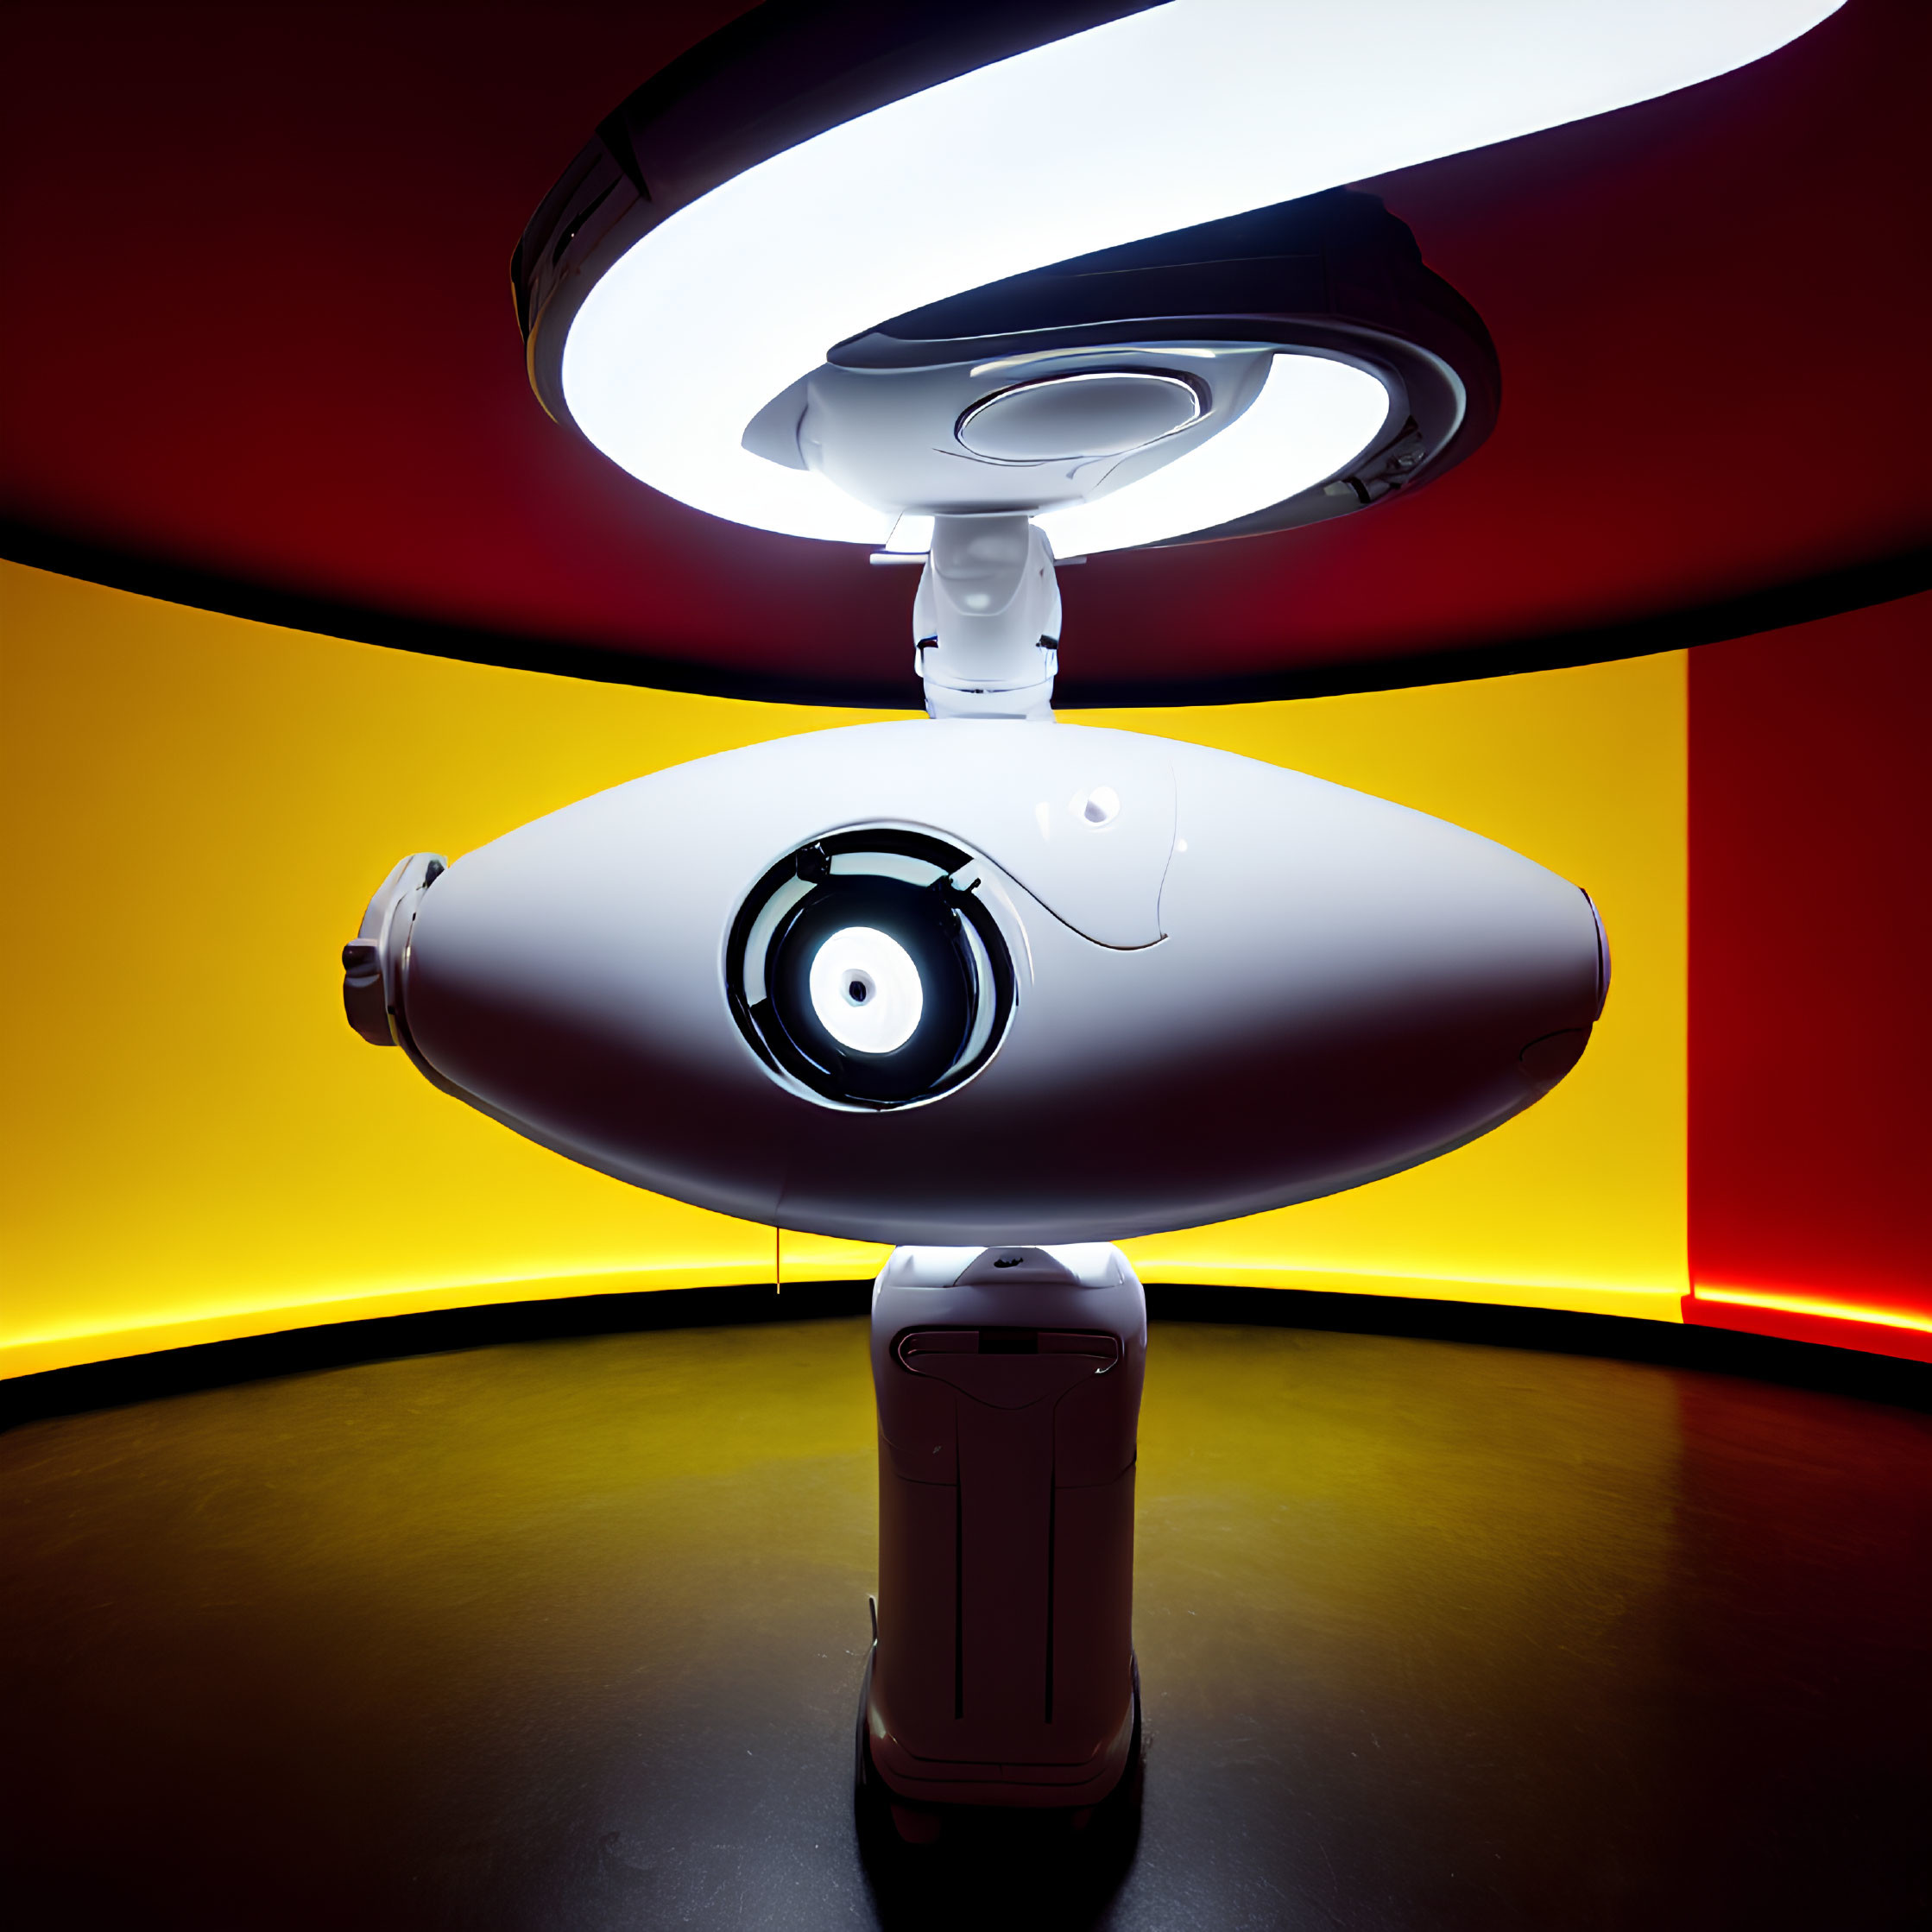 Futuristic white and black device in room with red and yellow lighting